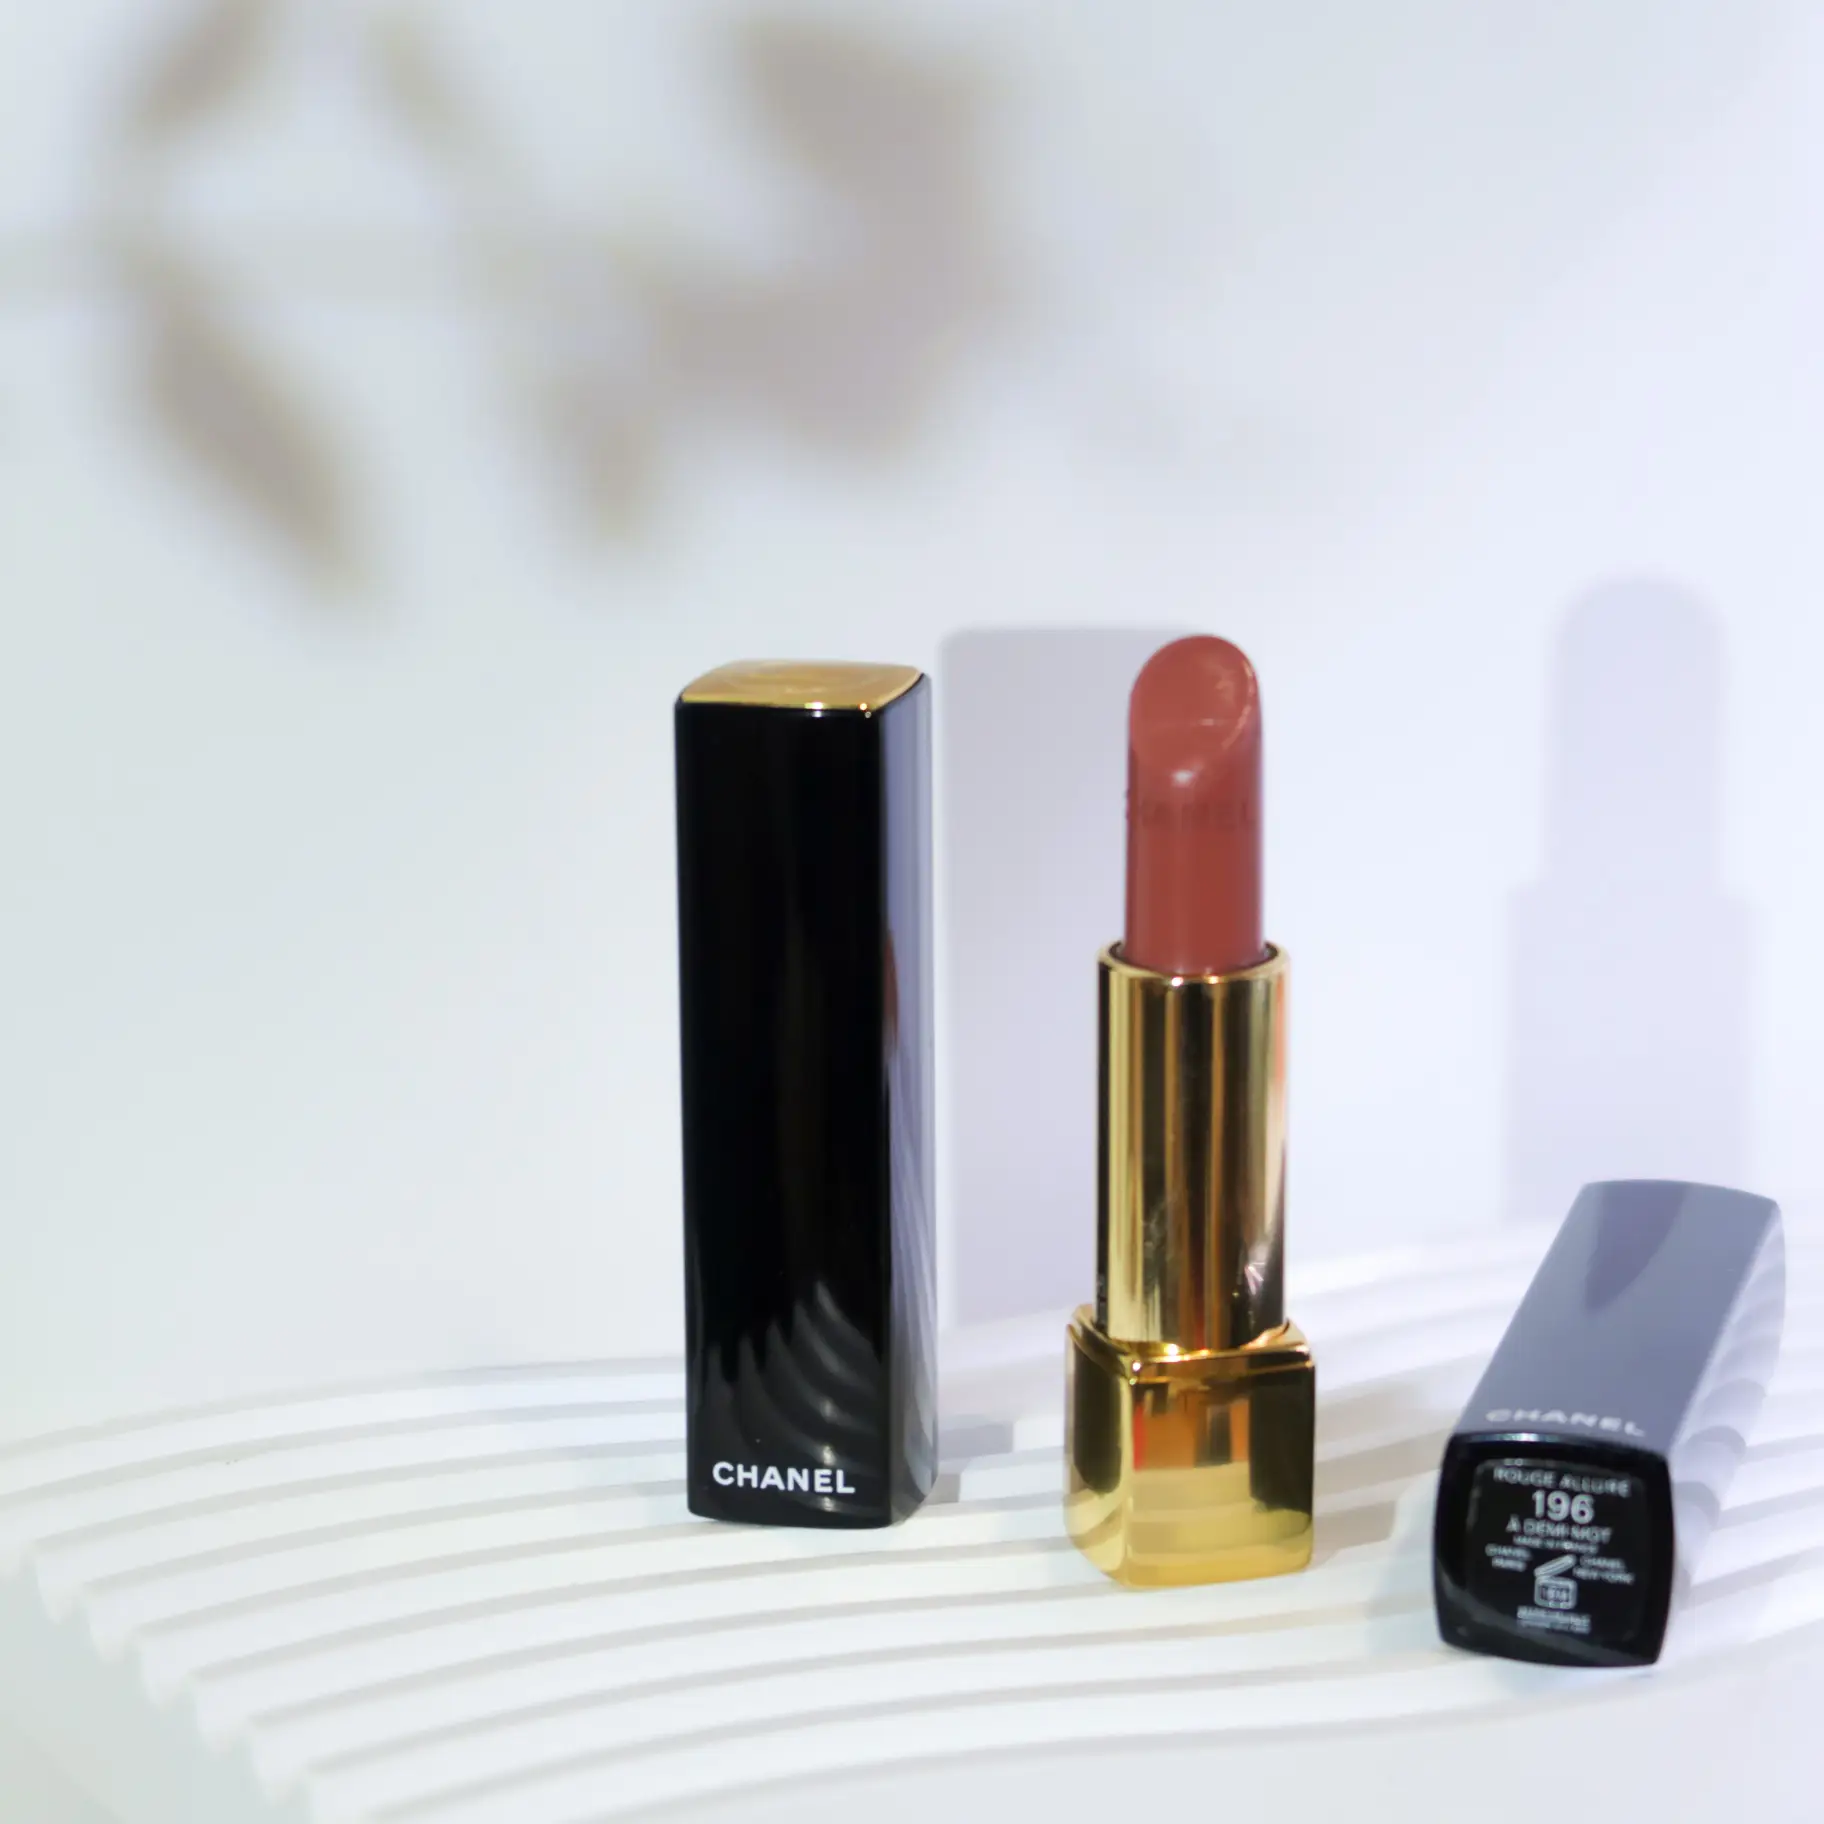 Your child's nude lipstick tone drug sign from CHANEL 💄, Gallery posted  by Uncle Bank